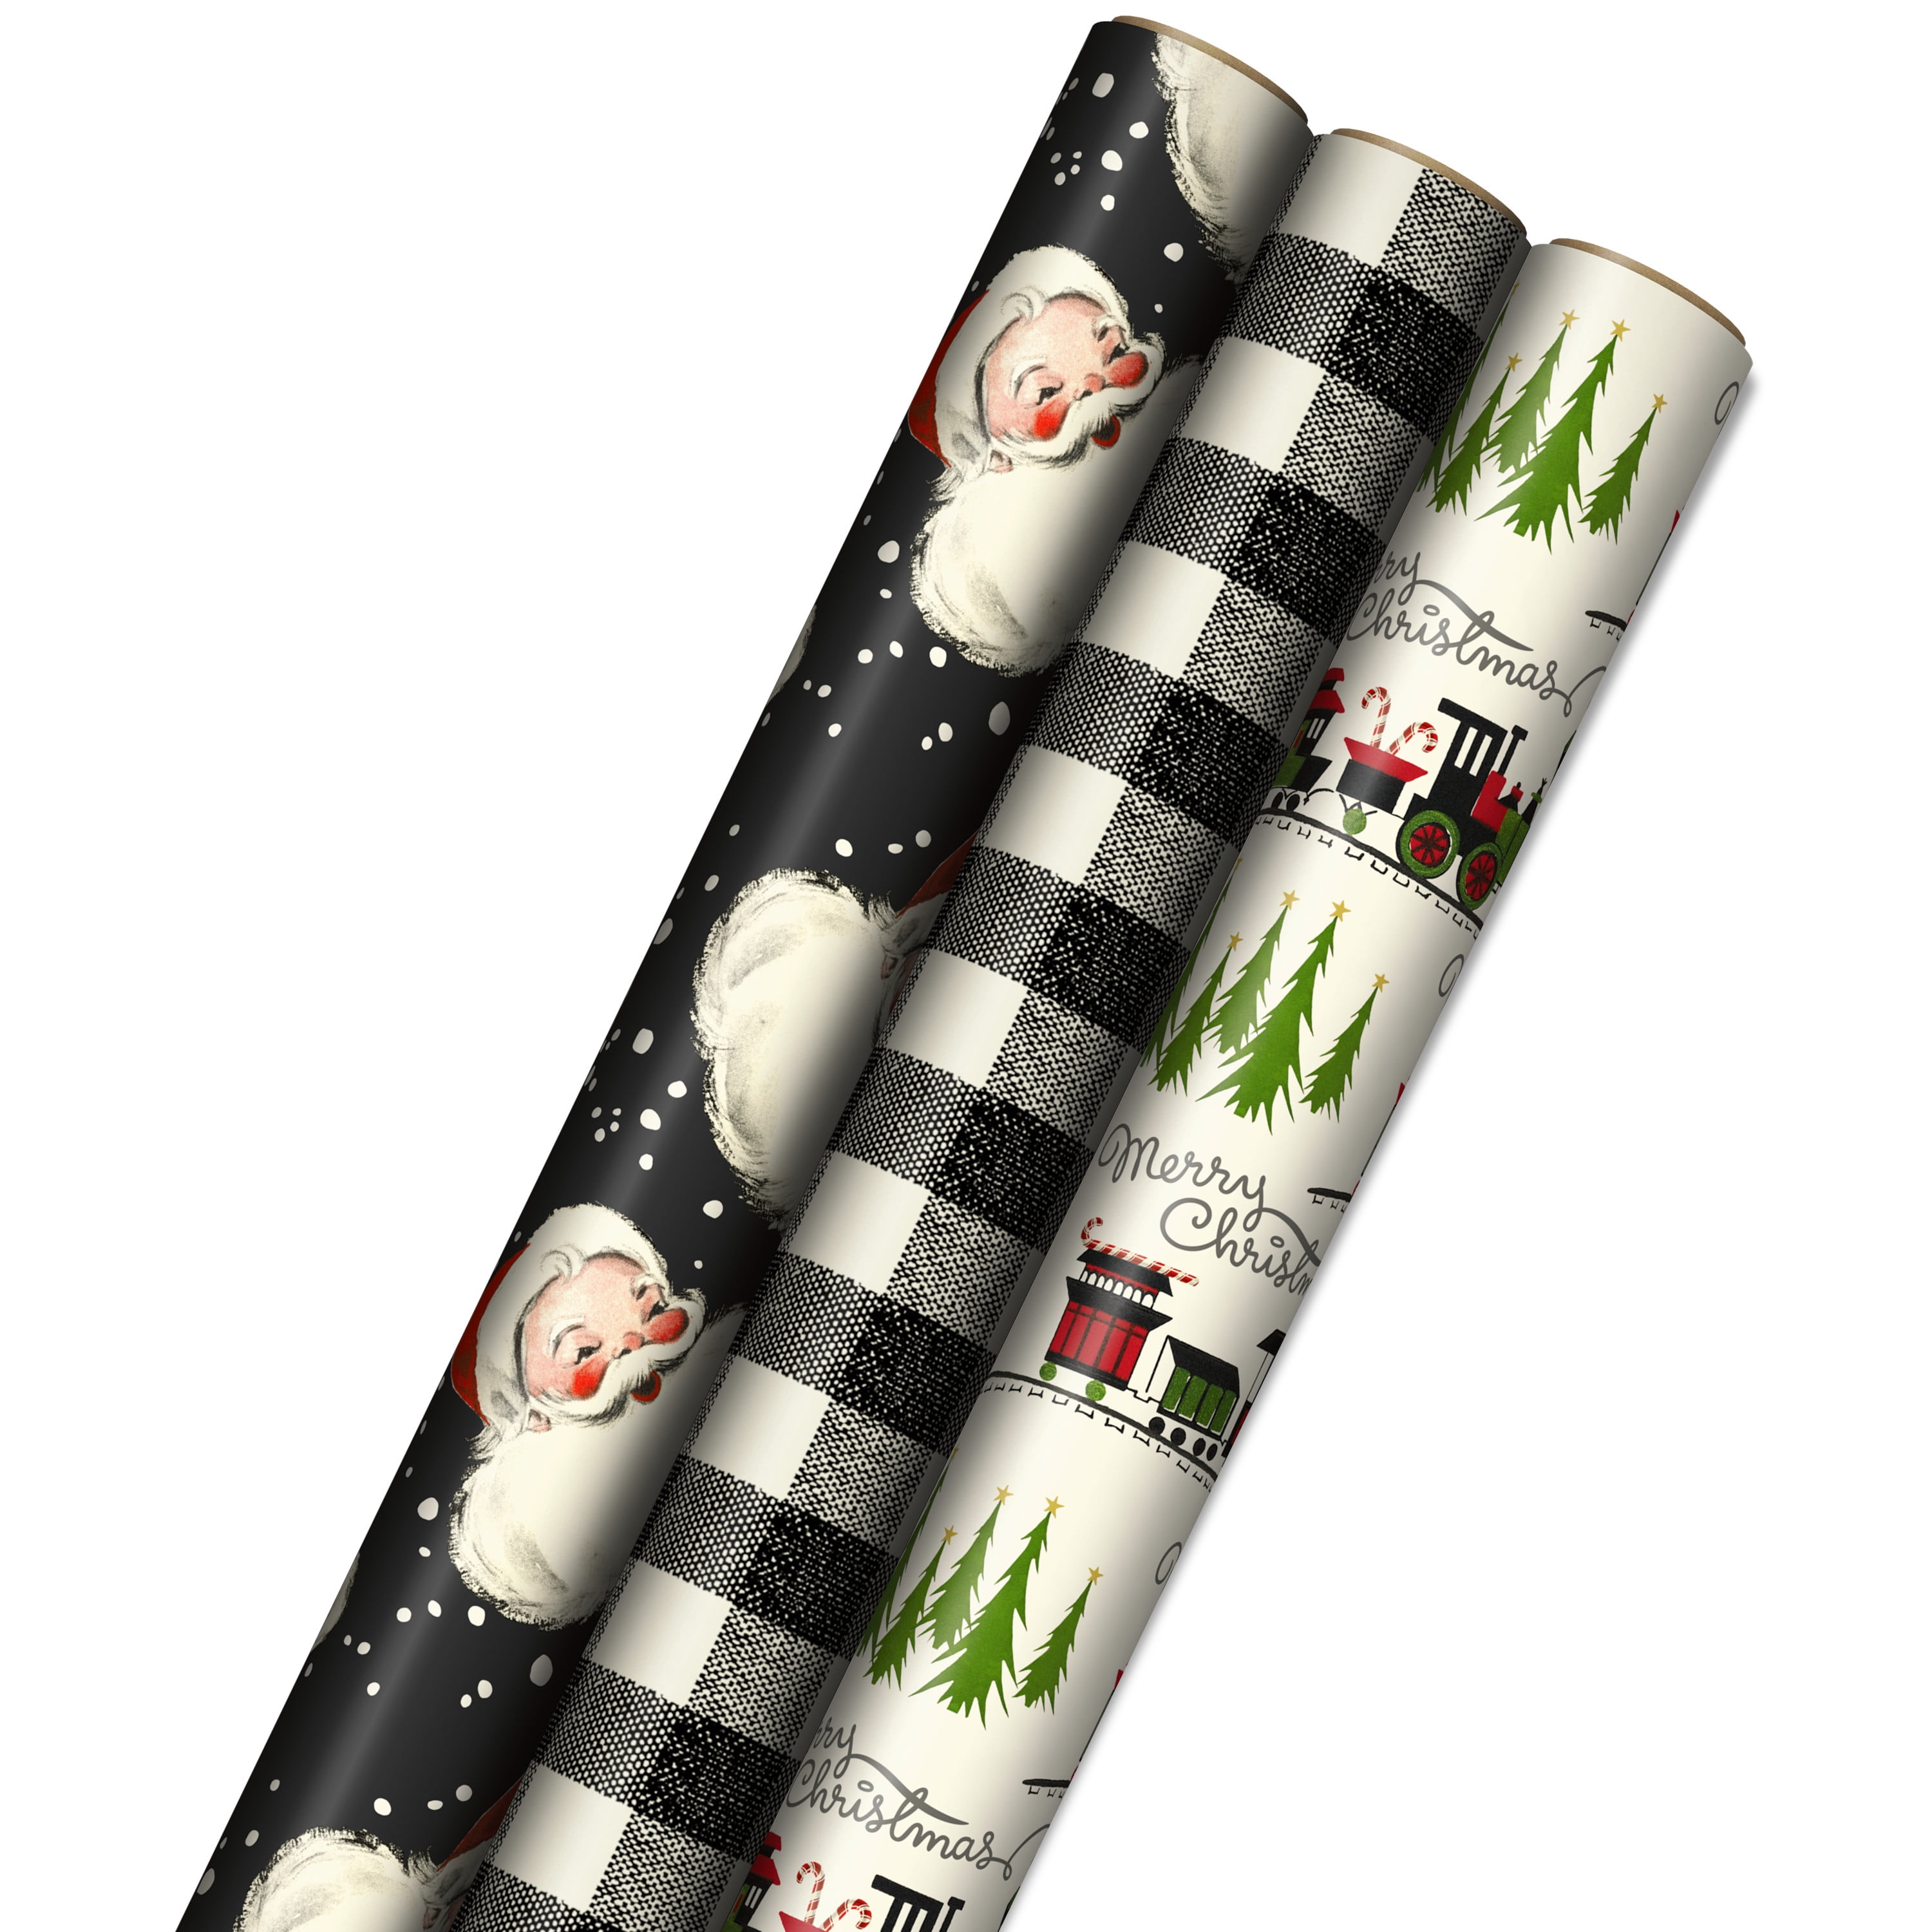 Christmas Wrapping Paper, Vintage Kraft Paper Gift Wrapping Paper, Santa  Claus Christmas Tree Cartoon Wrapping Paper, Each, Navidad, Wrapping Paper,  Tissue Paper, Flower Bouquet Supplies, Gift Wrapping Paper, Flower Wrapping  Paper, Gift